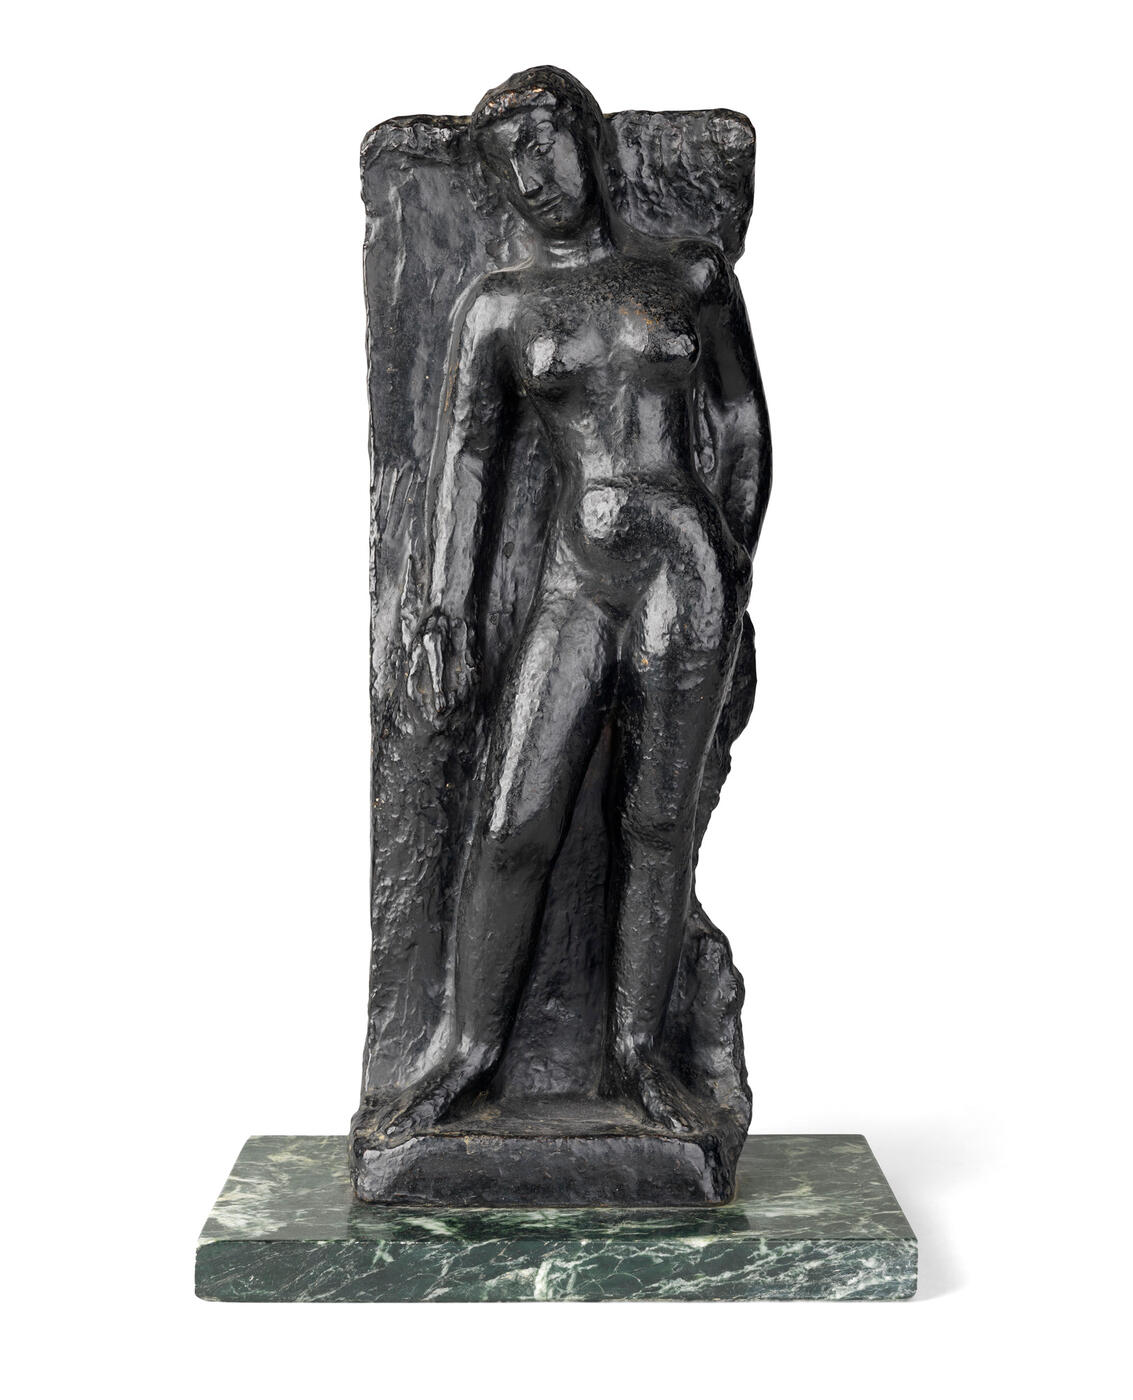 AFTER A MODEL BY LÉON INDENBAUM, INSCRIBED WITH A SIGNATURE, C. VALSUANI FOUNDRY, 20TH CENTURY